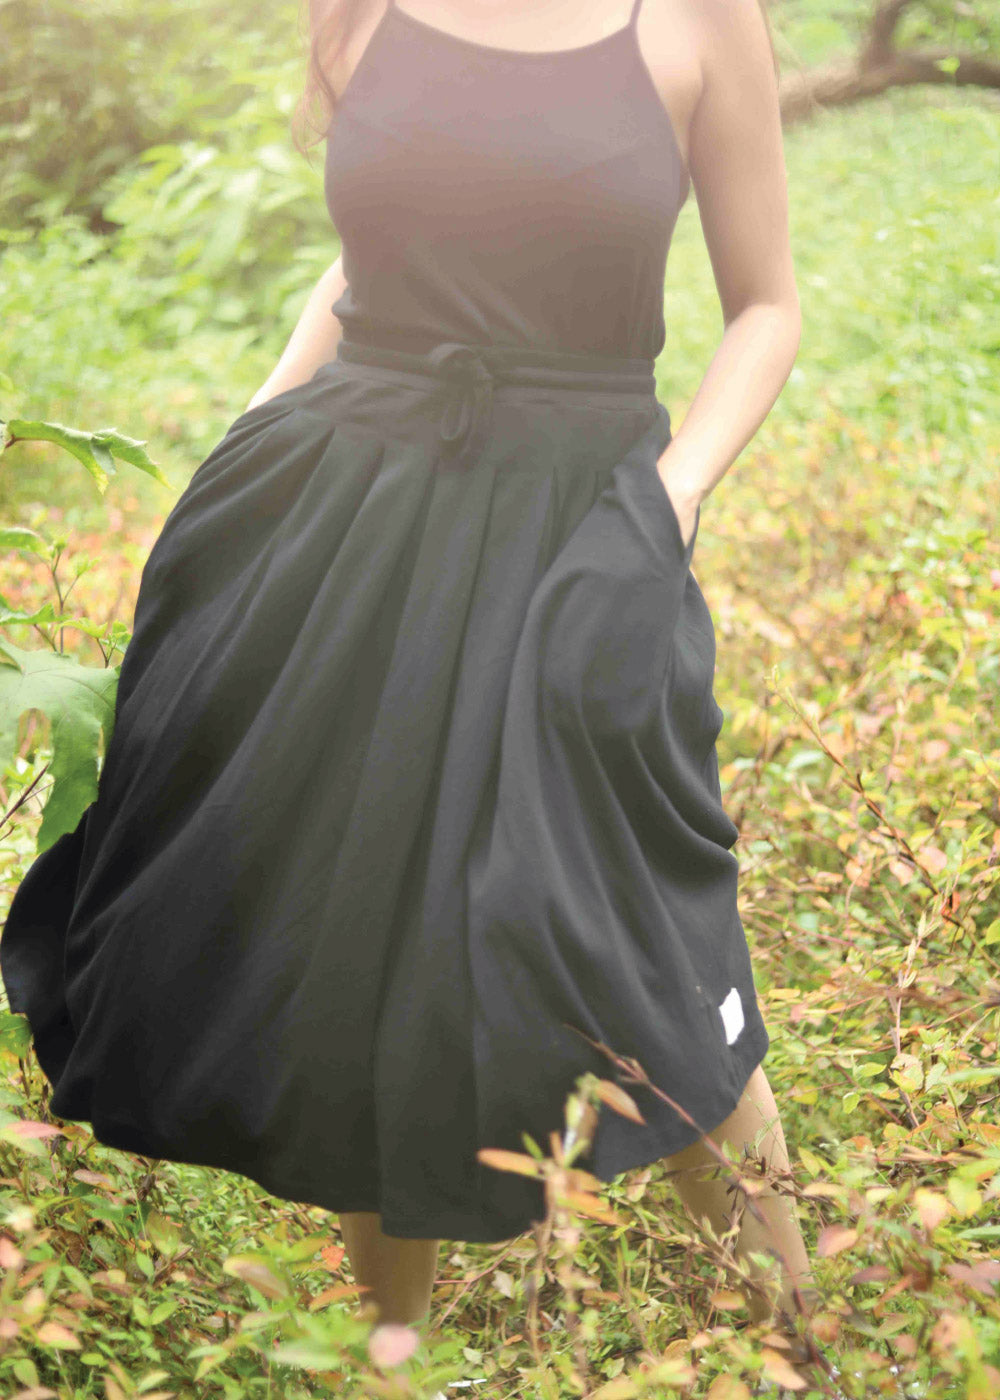 Black is a voluminous skirt with side seam pockets and an adjustable drawstring waistband.